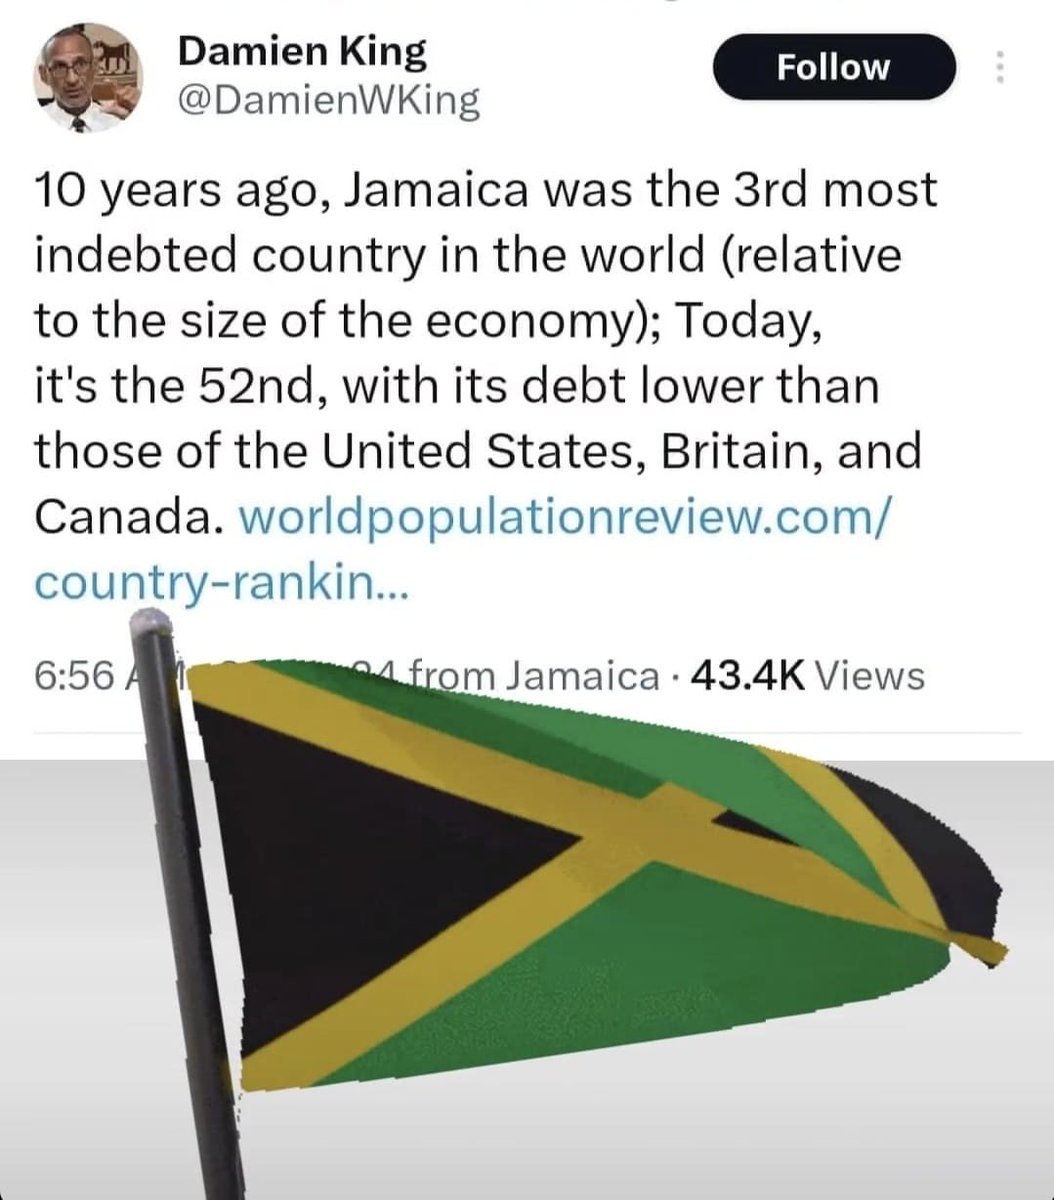 Good news Tuesdays - this Andrew Holness led administration is fueled by one thing only, and that is to improve the lives of all Jamaicans . This will be achieved by strengthening our dollar and Lessing our debts so that we can invest in our human capital.